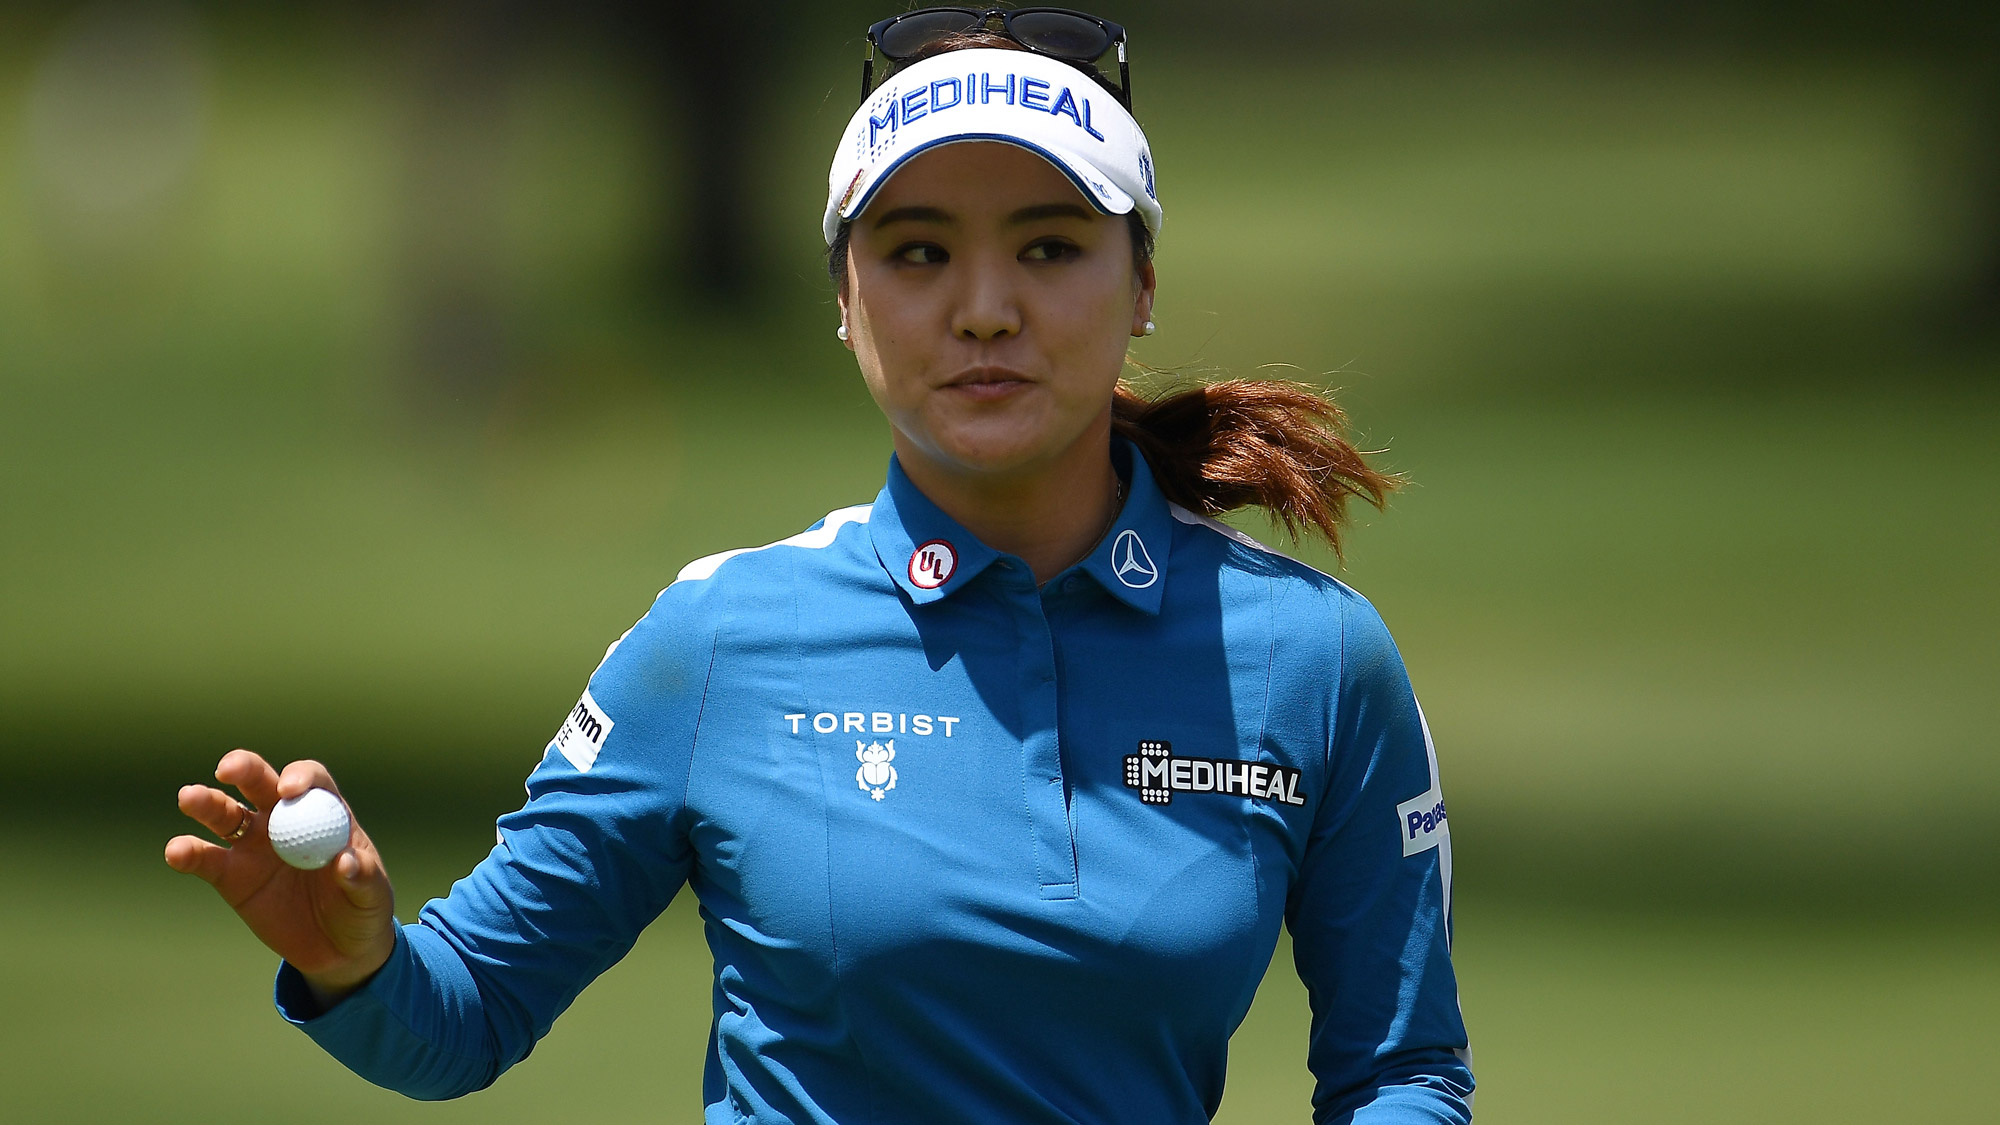 So Yeon Ryu Posts a 64 in Round One in Grand Rapids